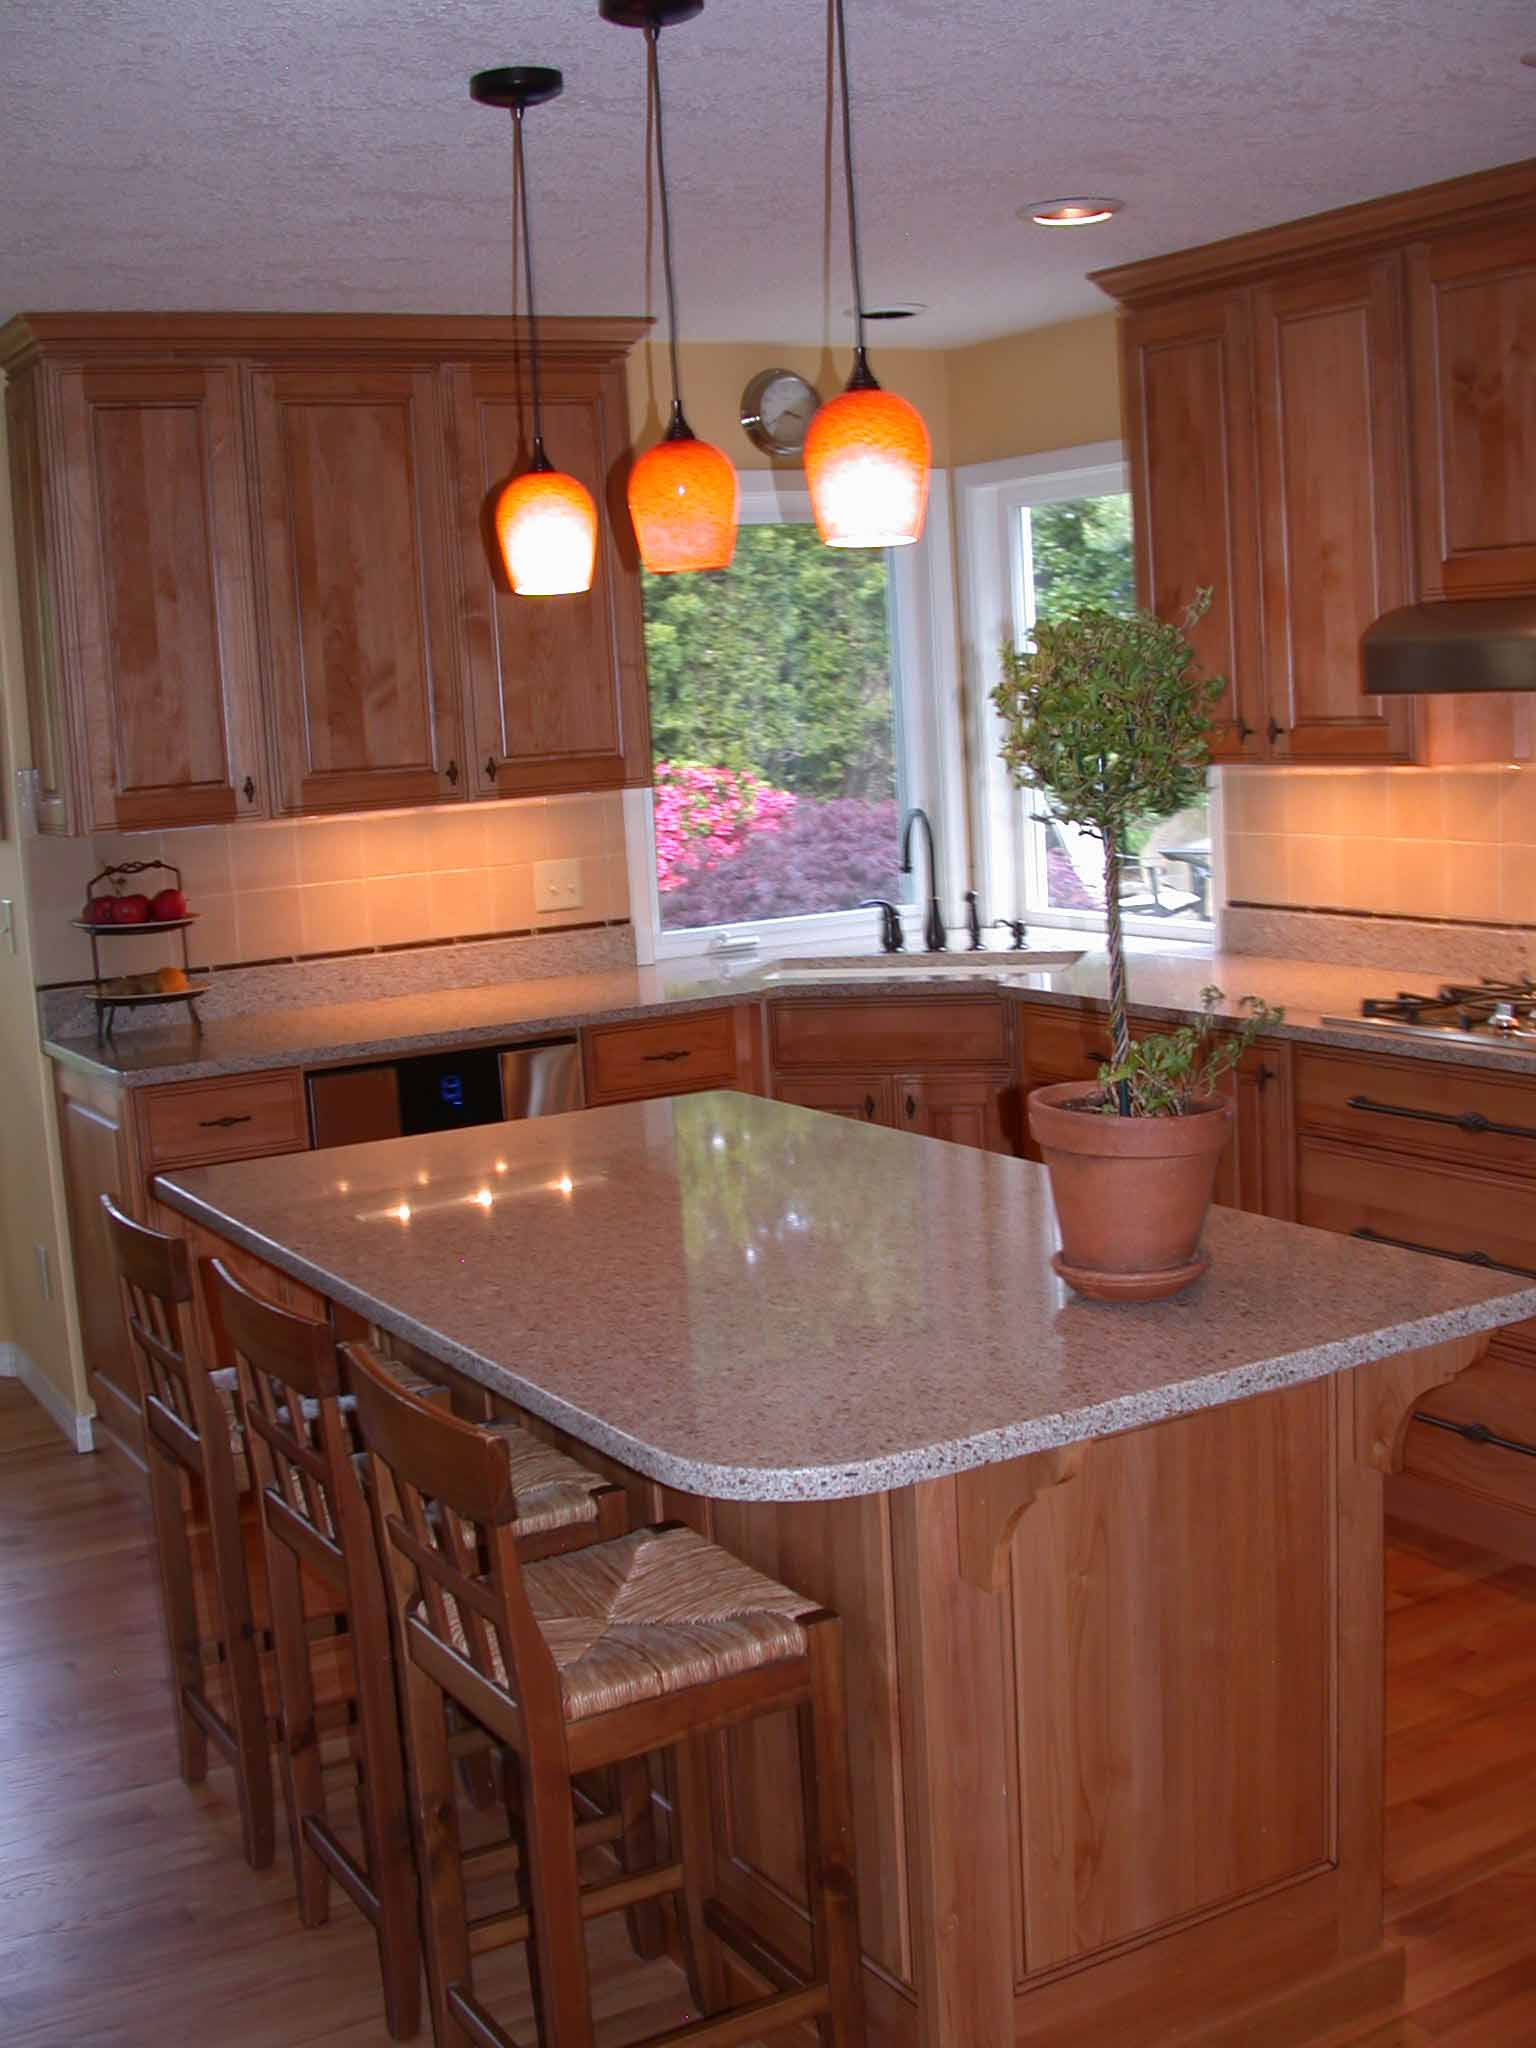 Kitchen with glazed cabinets